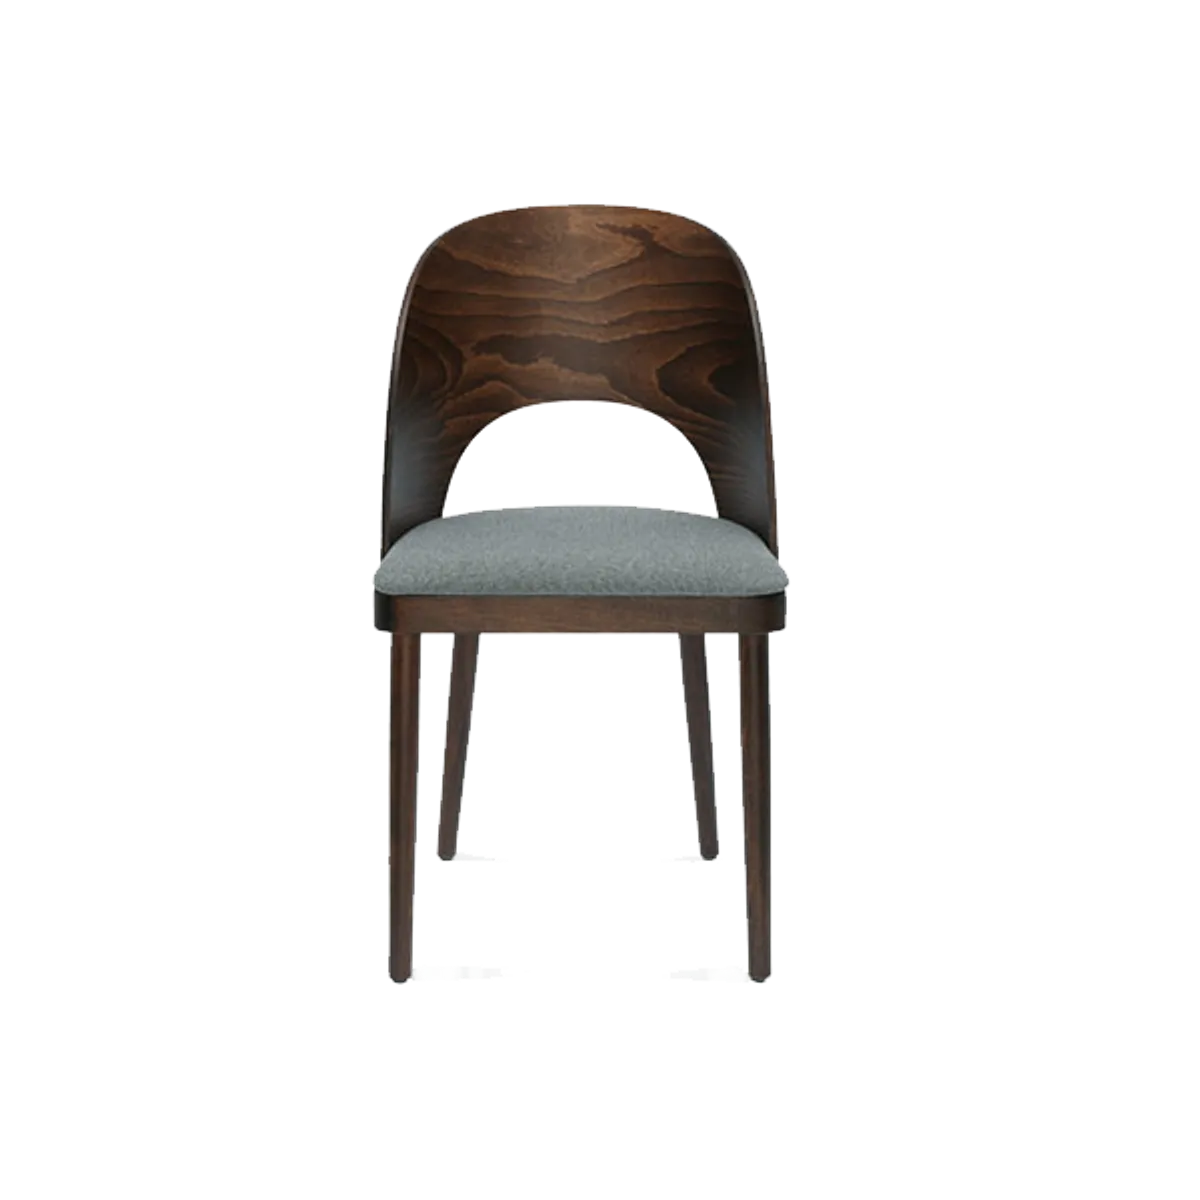 Web Curve Side Chair Inside Out Contracts